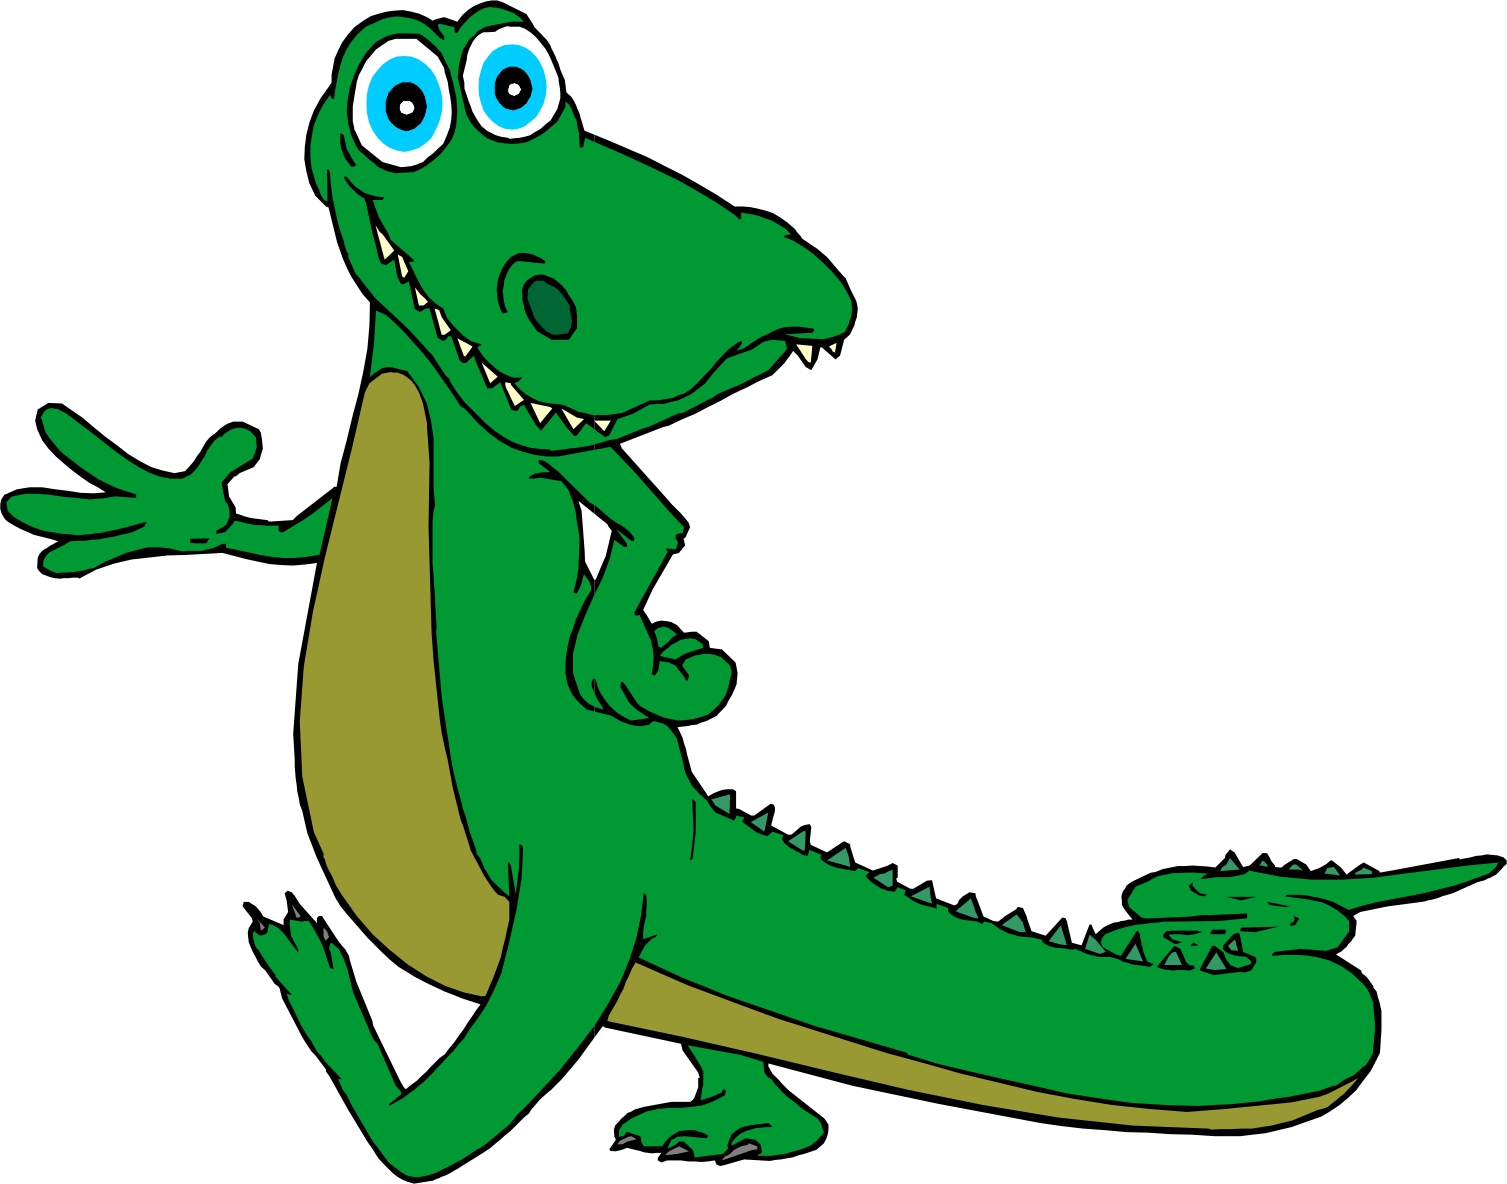 Crocodile free alligator clip art free clipart images 2 clipartcow